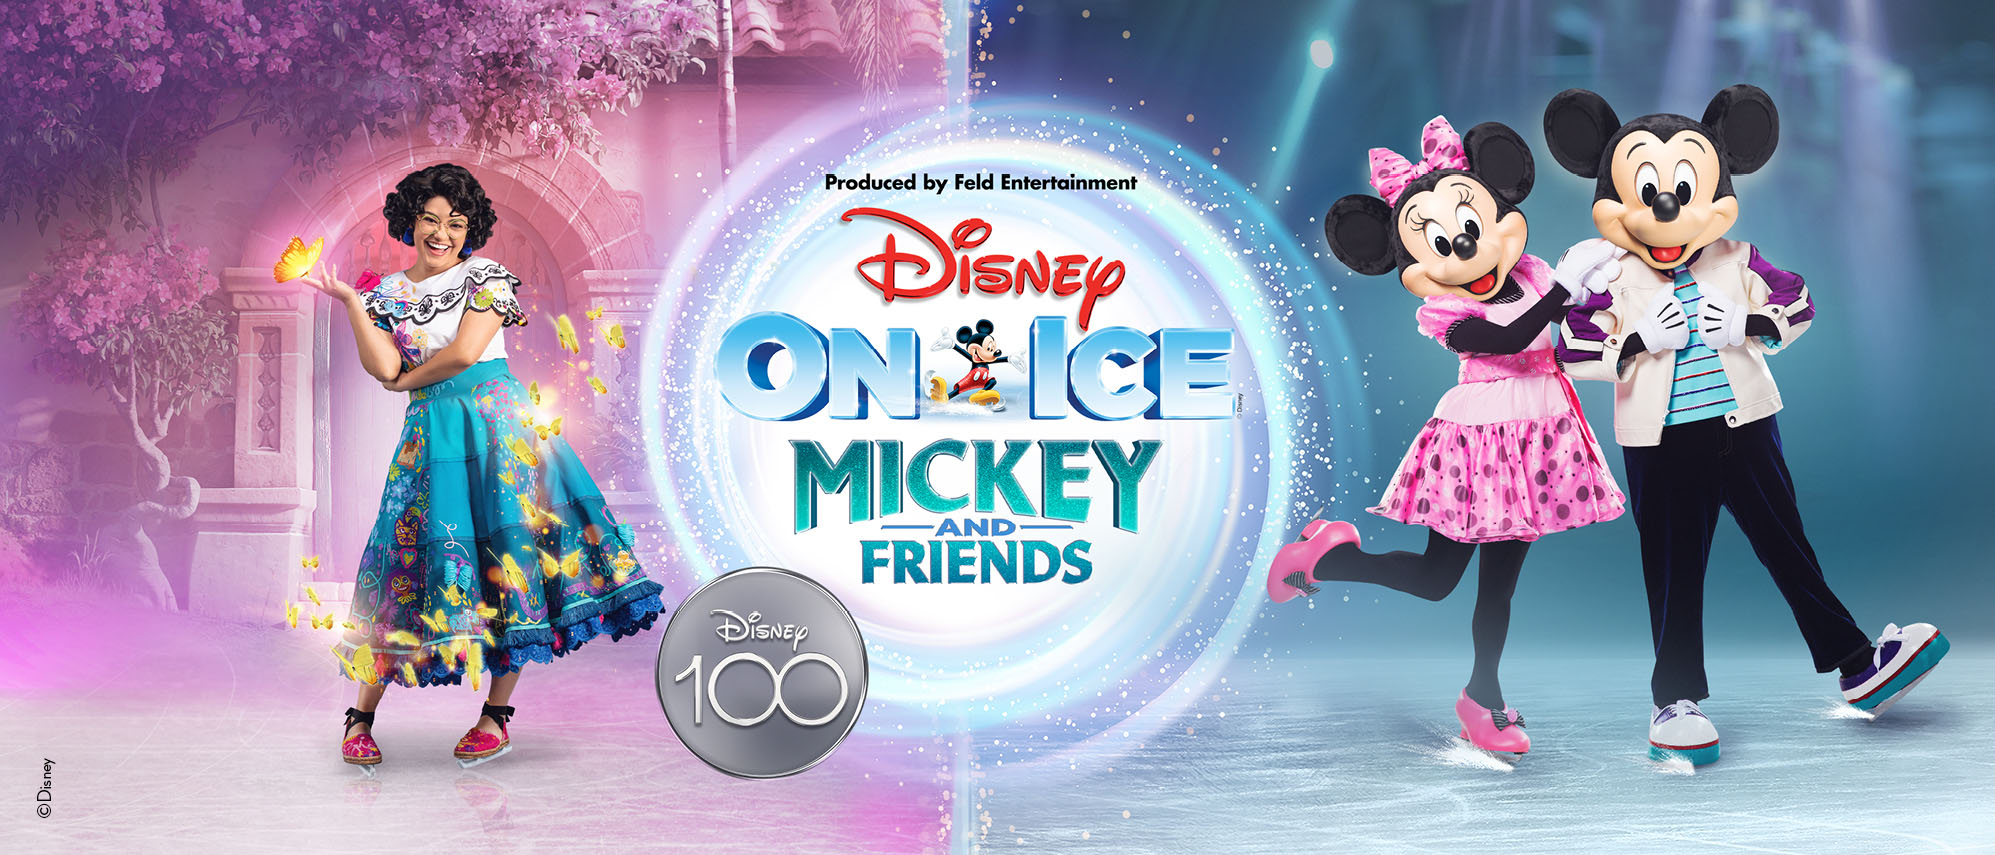 Produced by Feld Entertainment. Disney On Ice. Mickey and Friends. Disney 100.